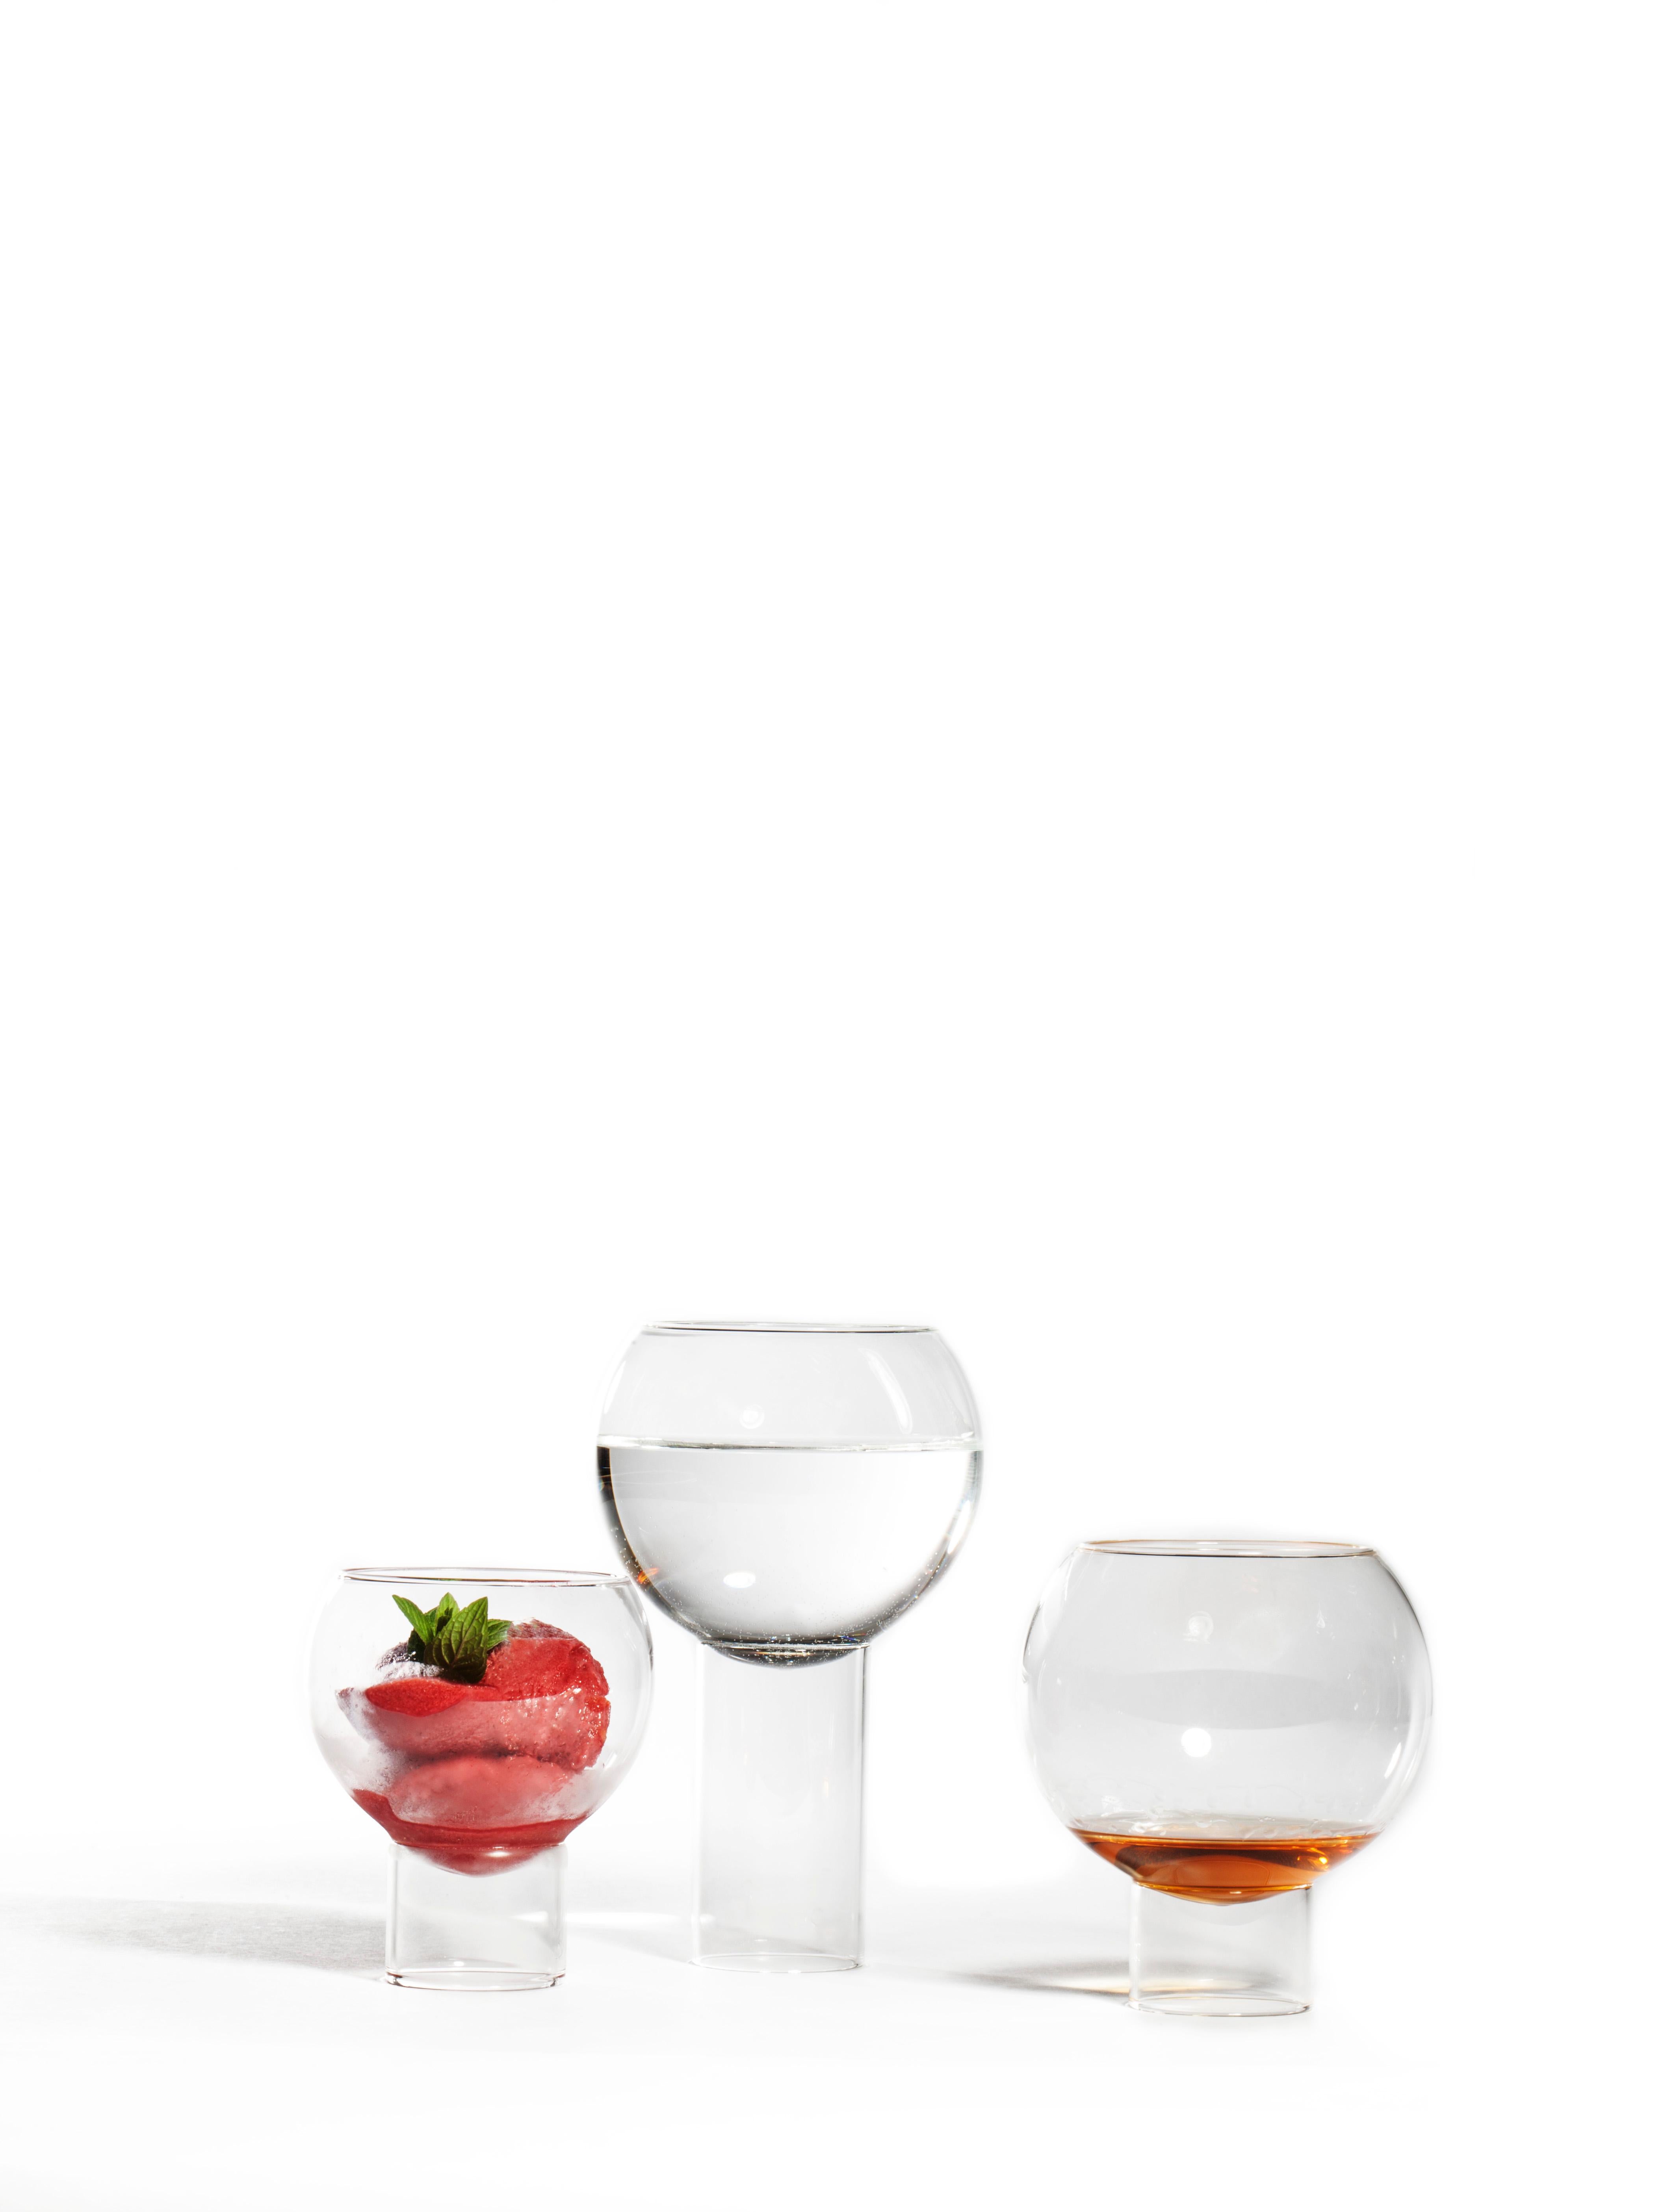 EU Clients Pair of Czech Contemporary Tulip Tall Medium Wine Glasses, in Stock 1